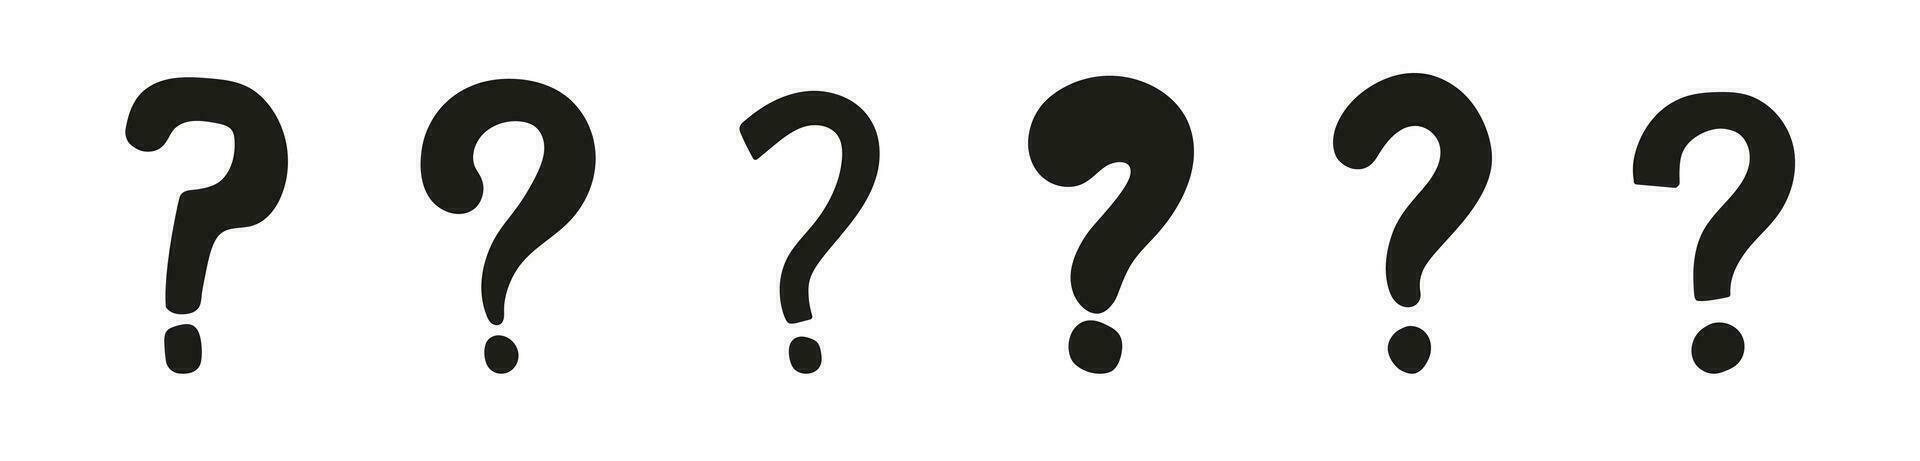 Hand drawn solid question mark. Black silhouette question mark vector